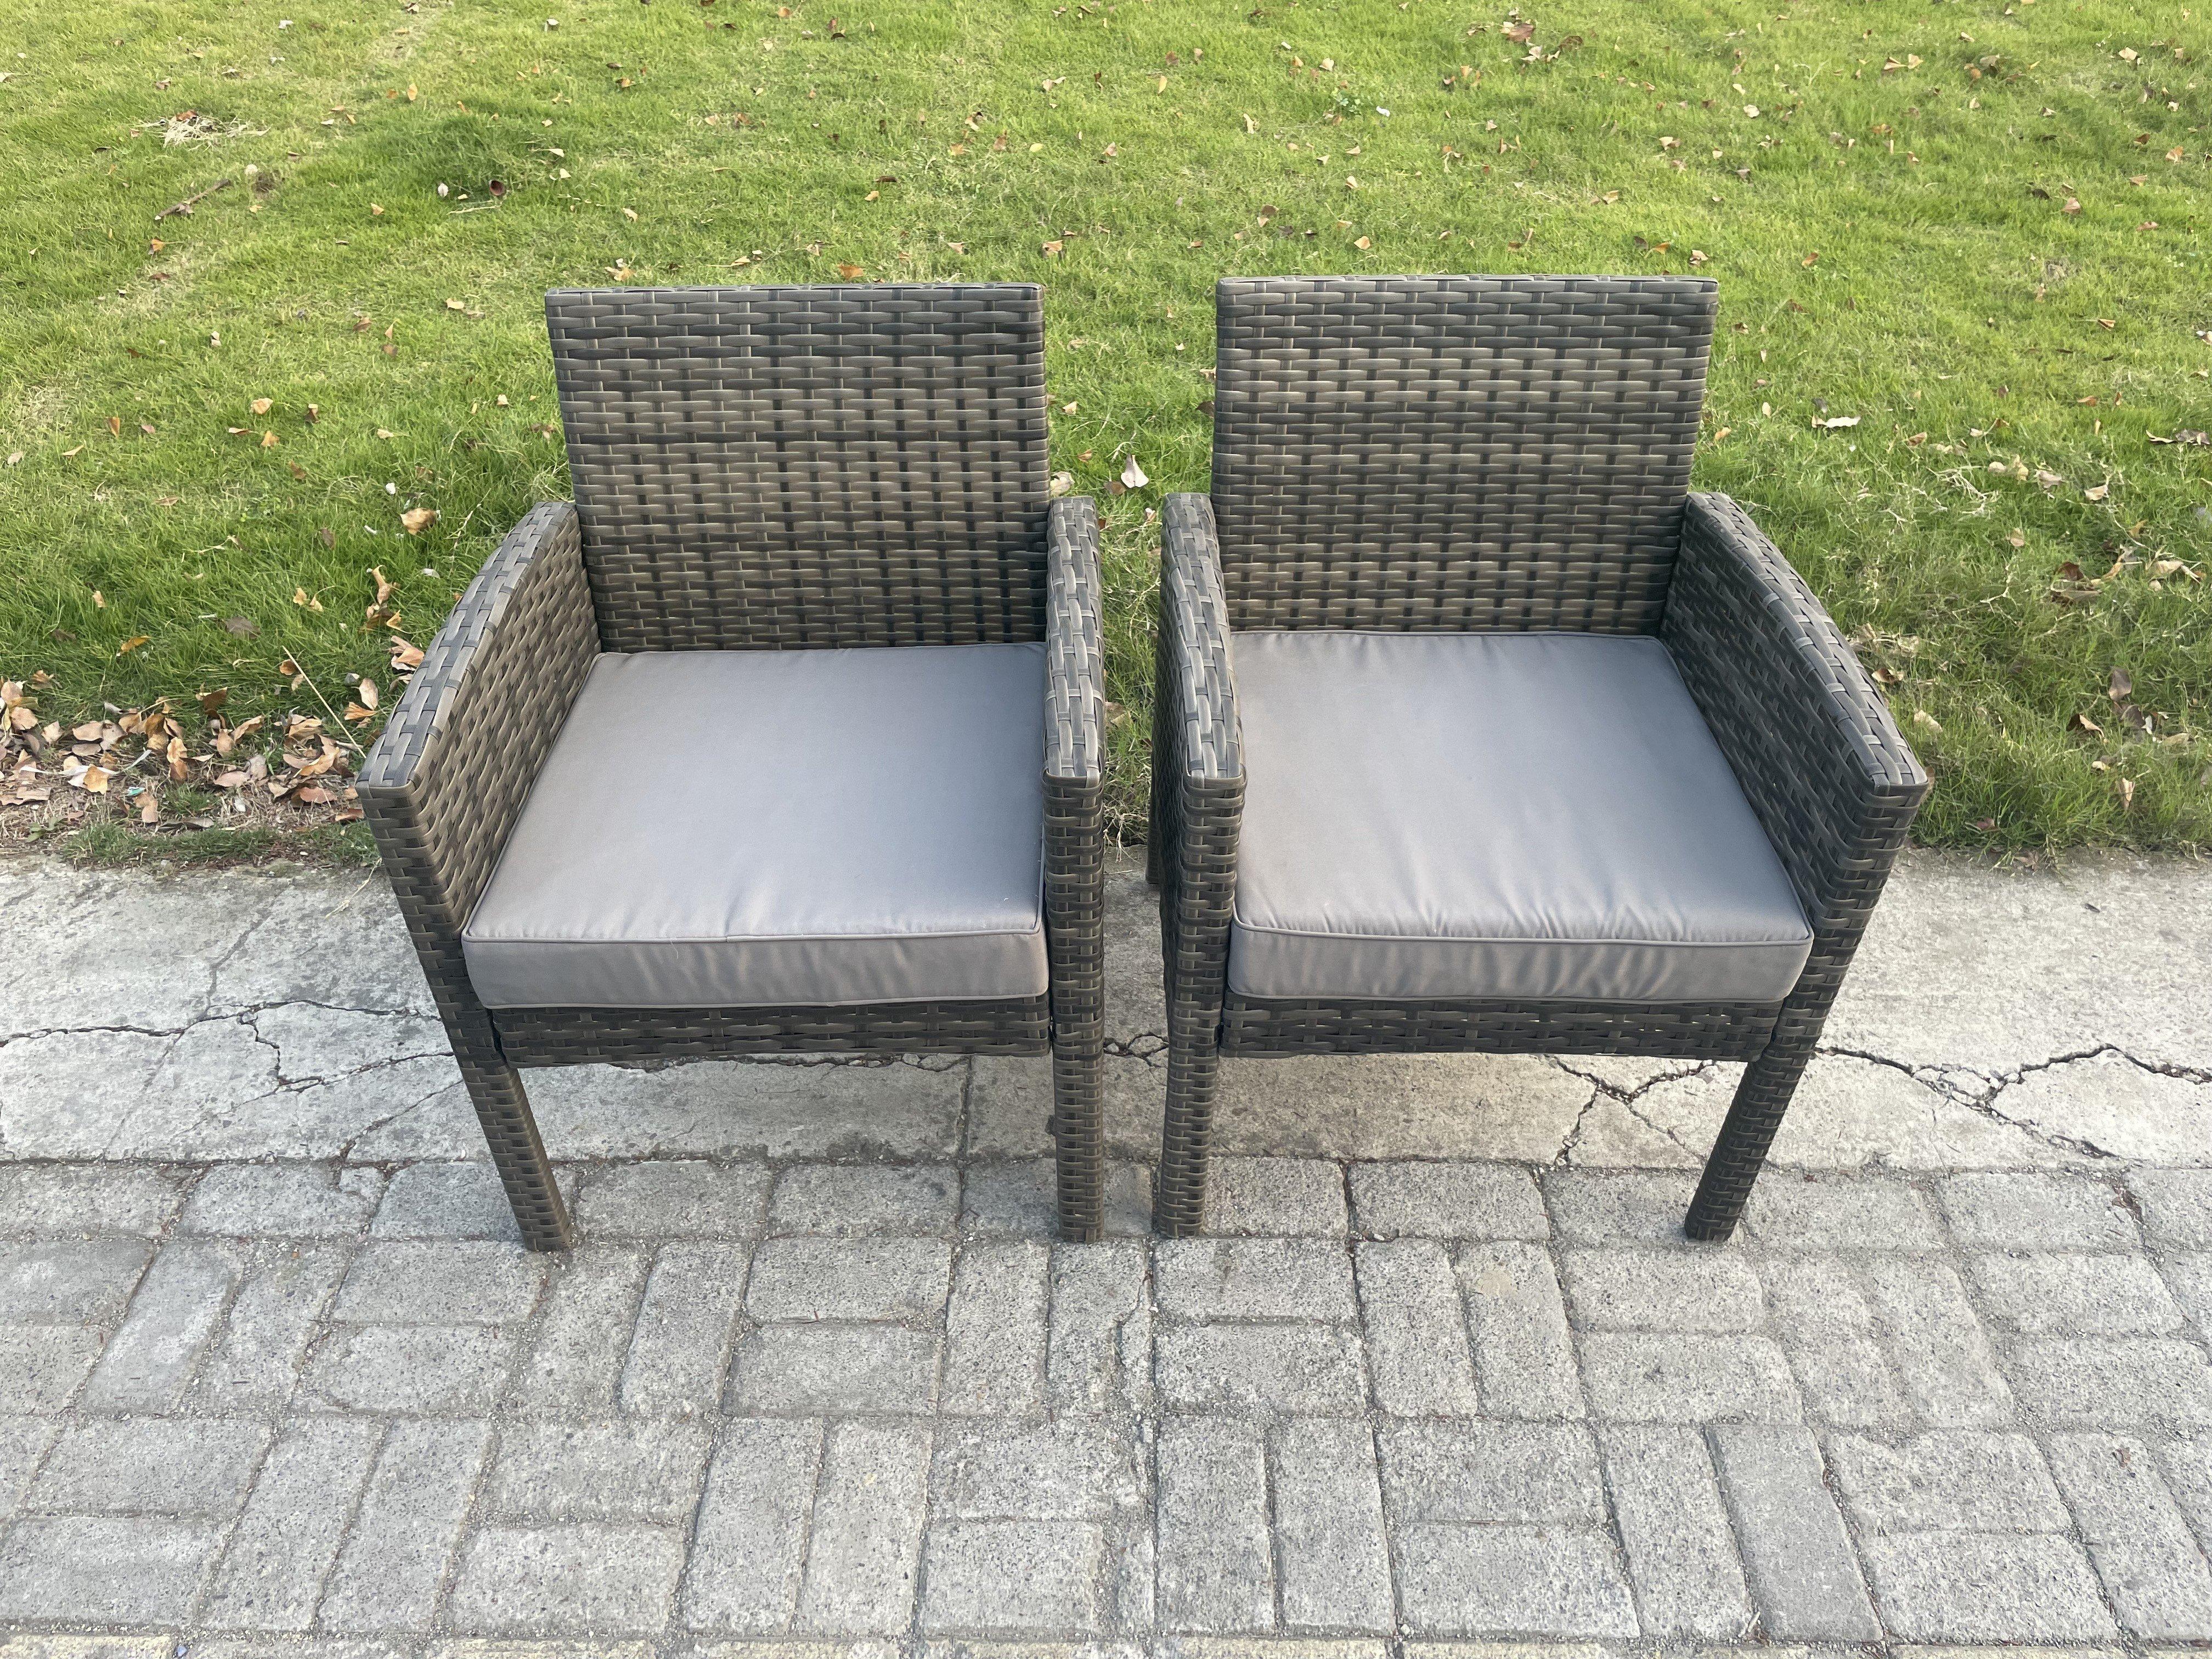 2 Pcs High Back Rattan Outdoor Garden Furniture Arm Chair with Thick Seat Cushion